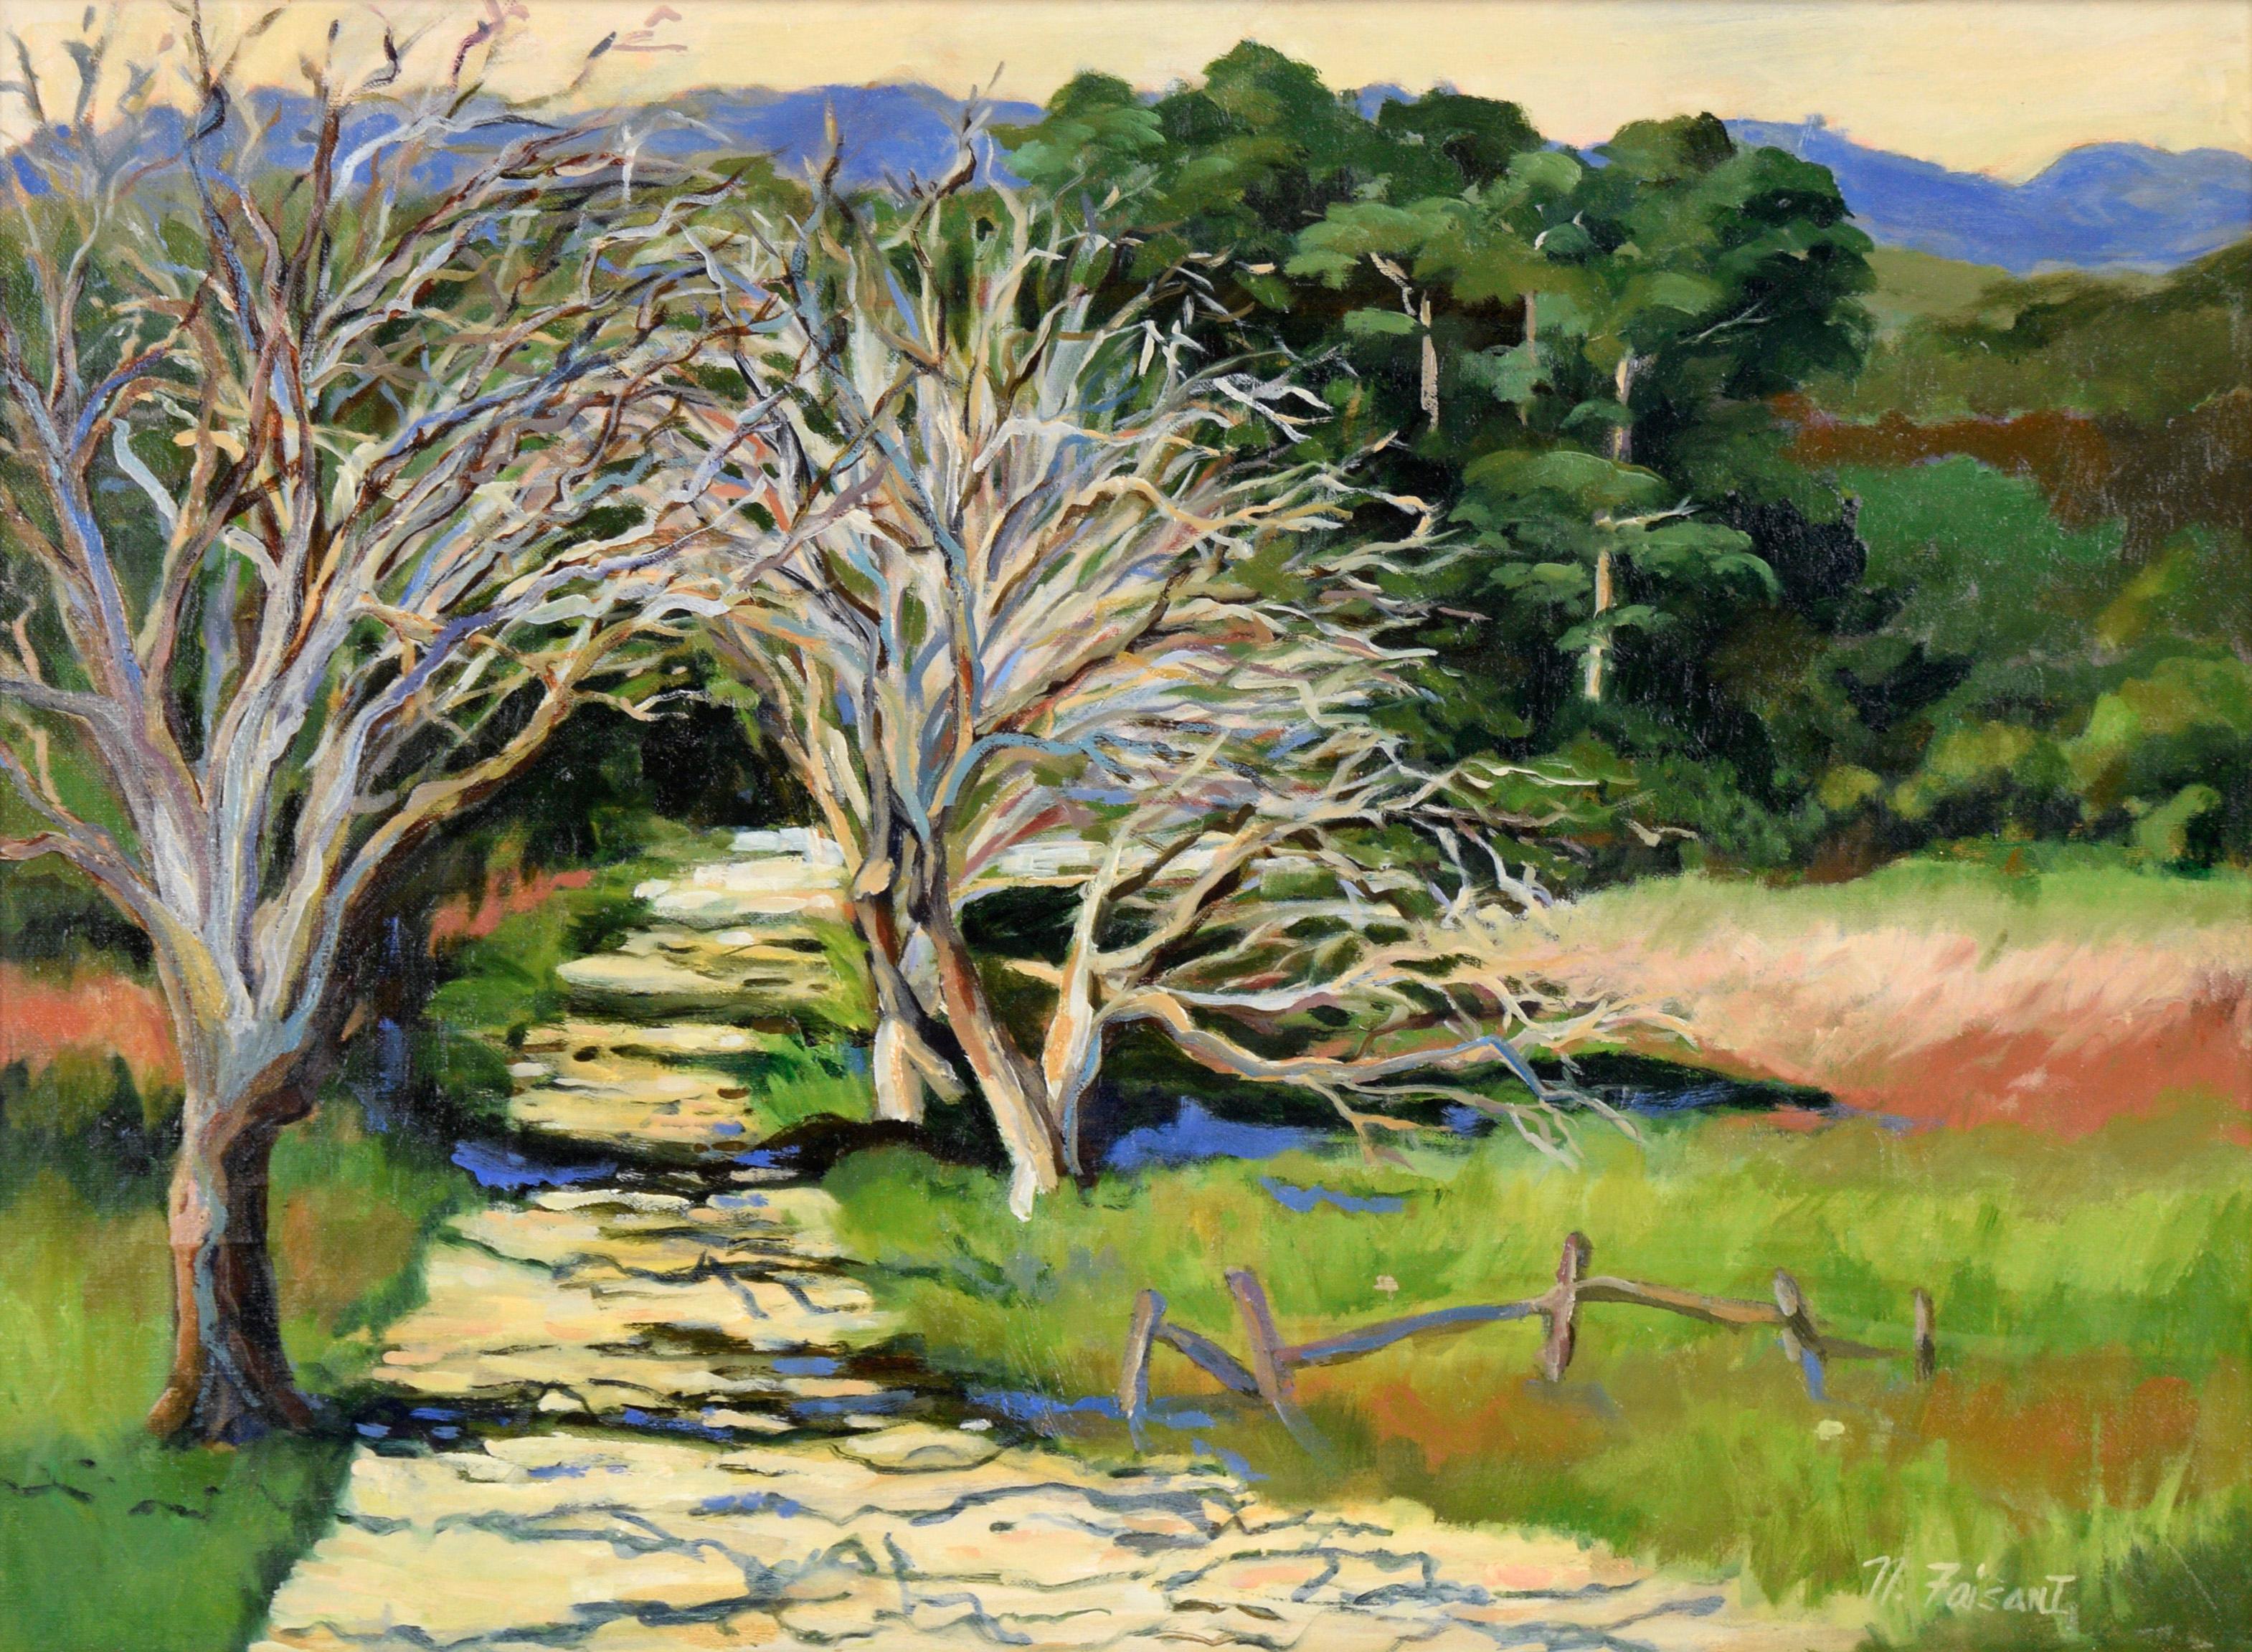 Shaded Path in the California Hills - Original Oil on Canvas (Laid on Board) - Painting by Nancy Faisant